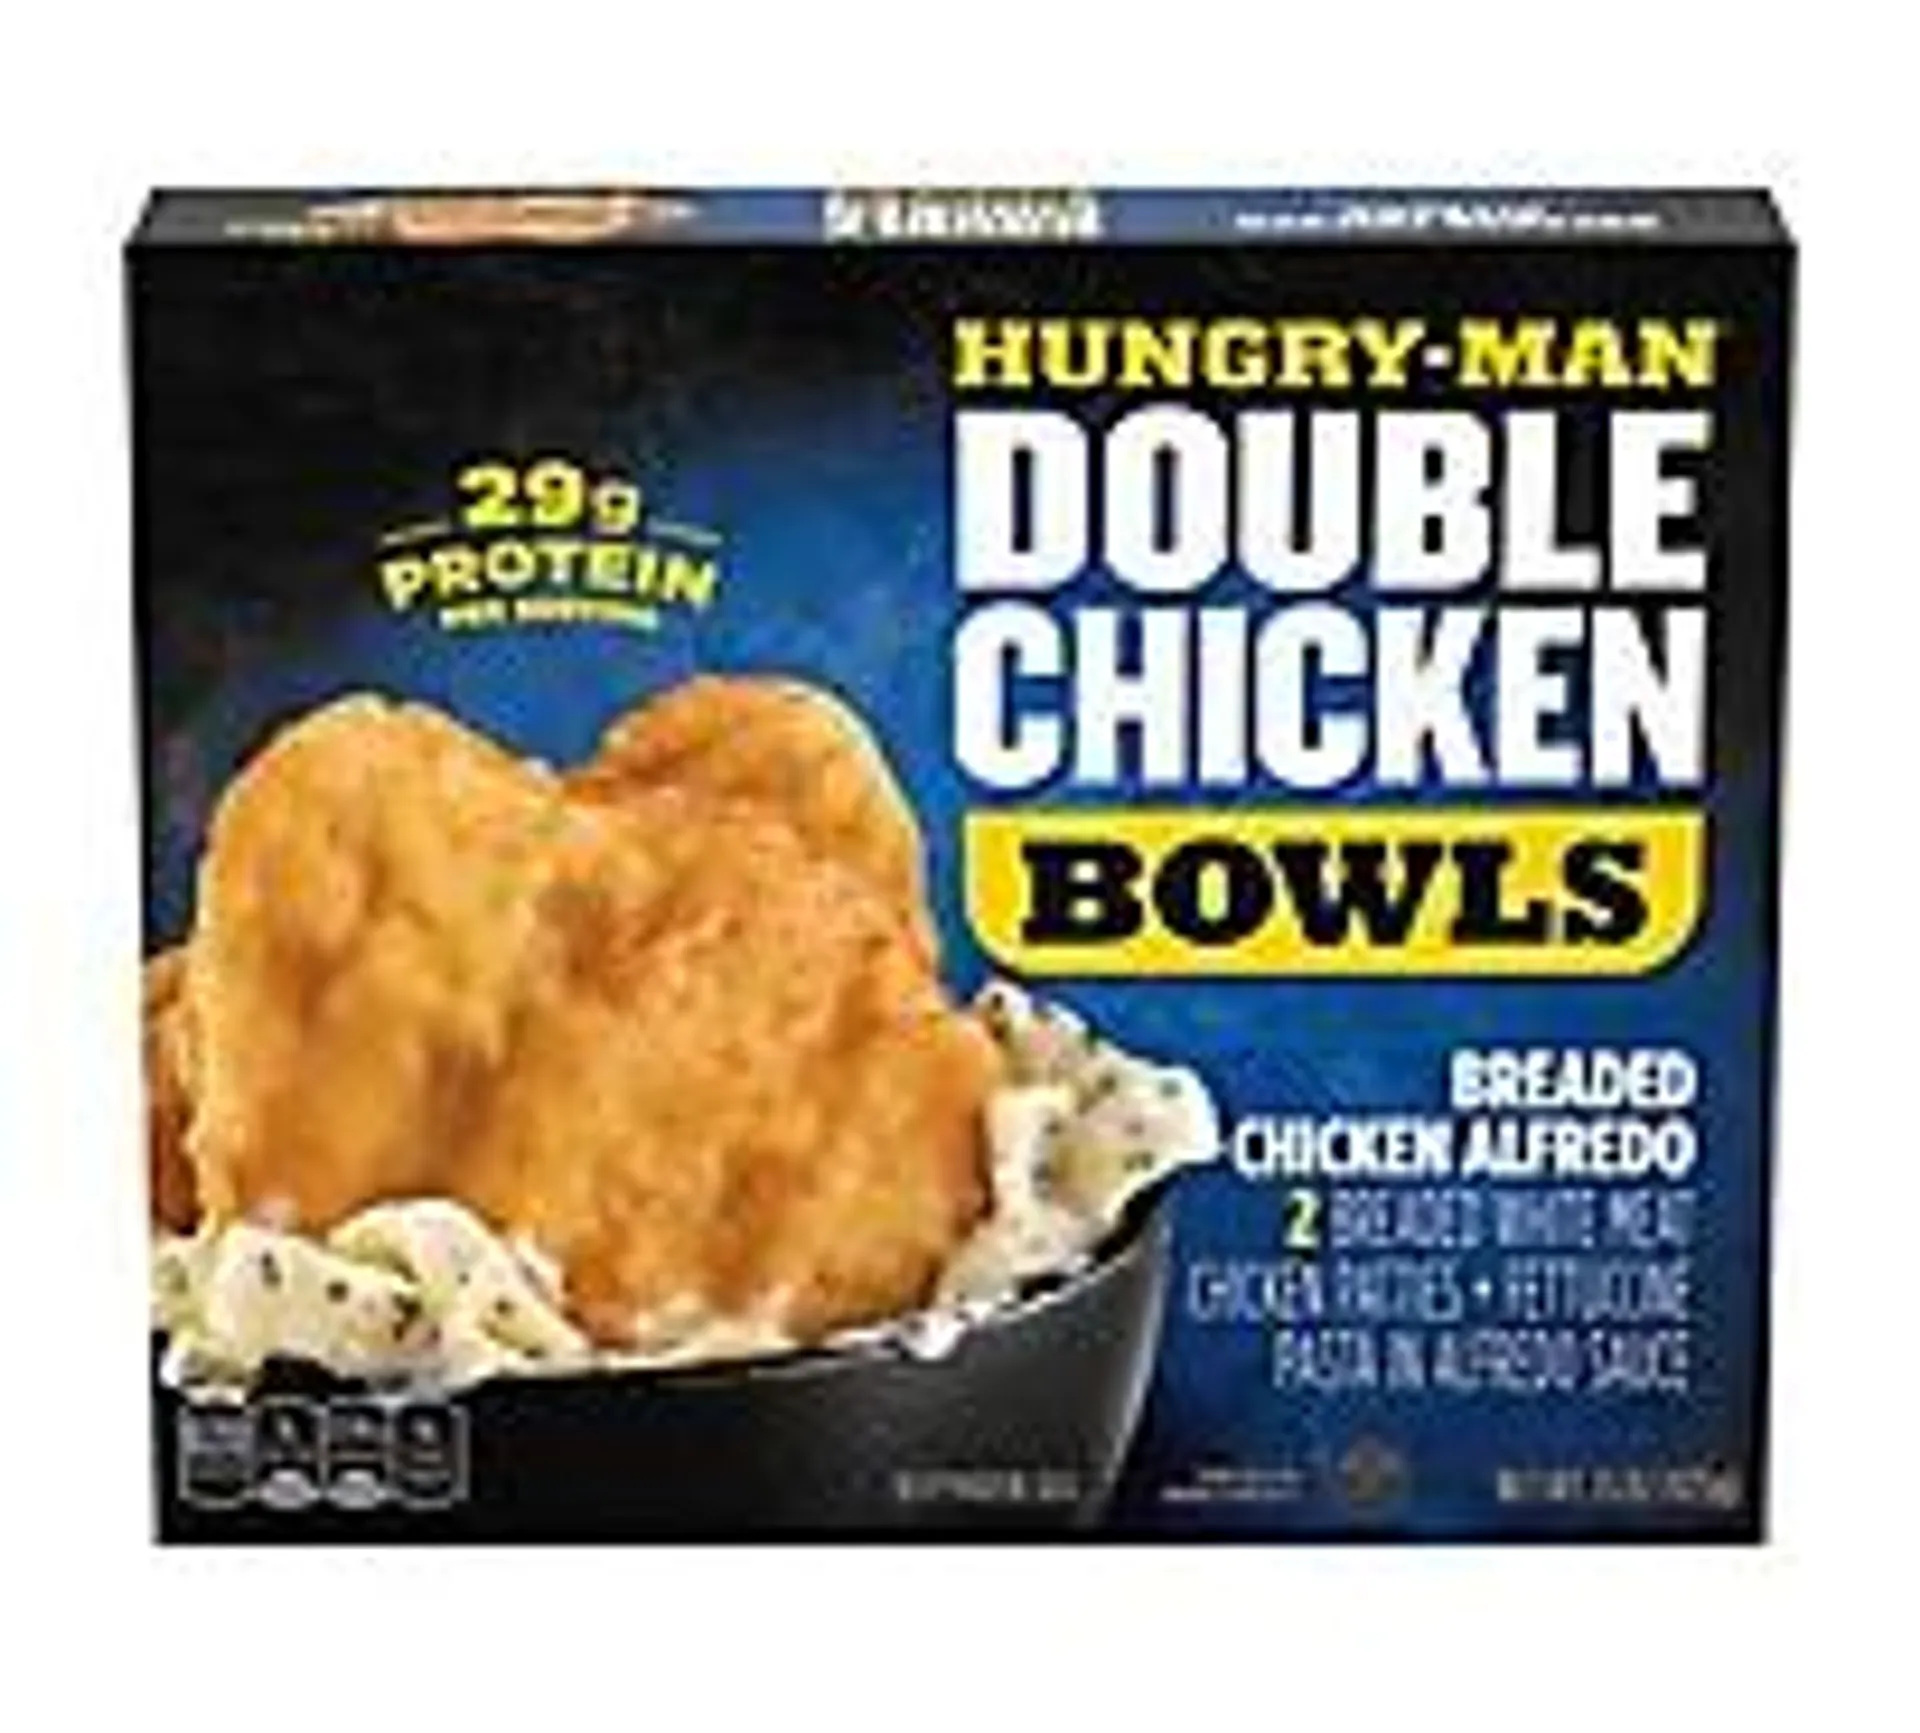 Hungry-man Double Chicken Bowl... Meal, 15 Oz - 15 OZ